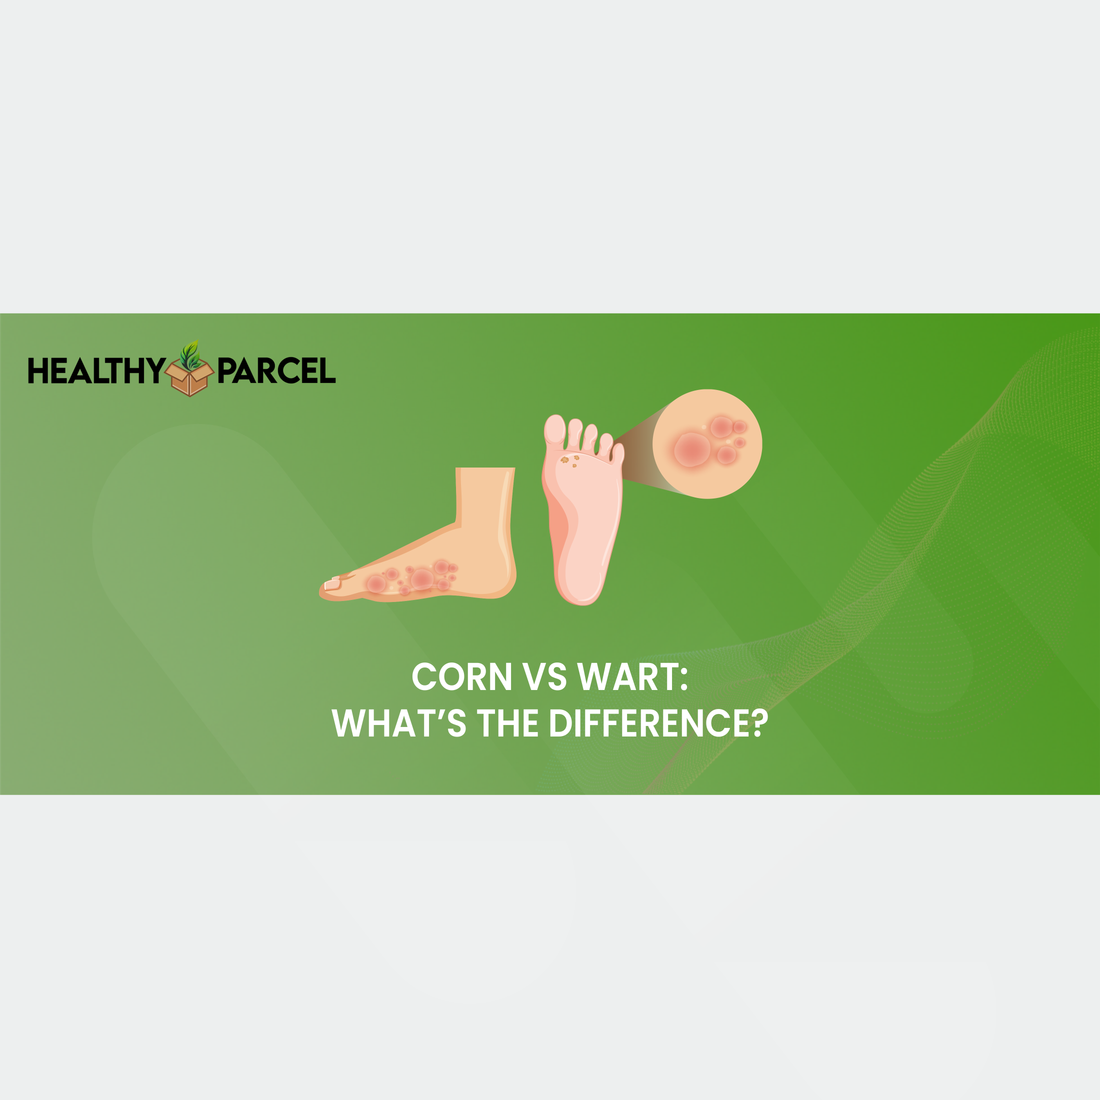 Corn vs Wart: What’s the Difference?